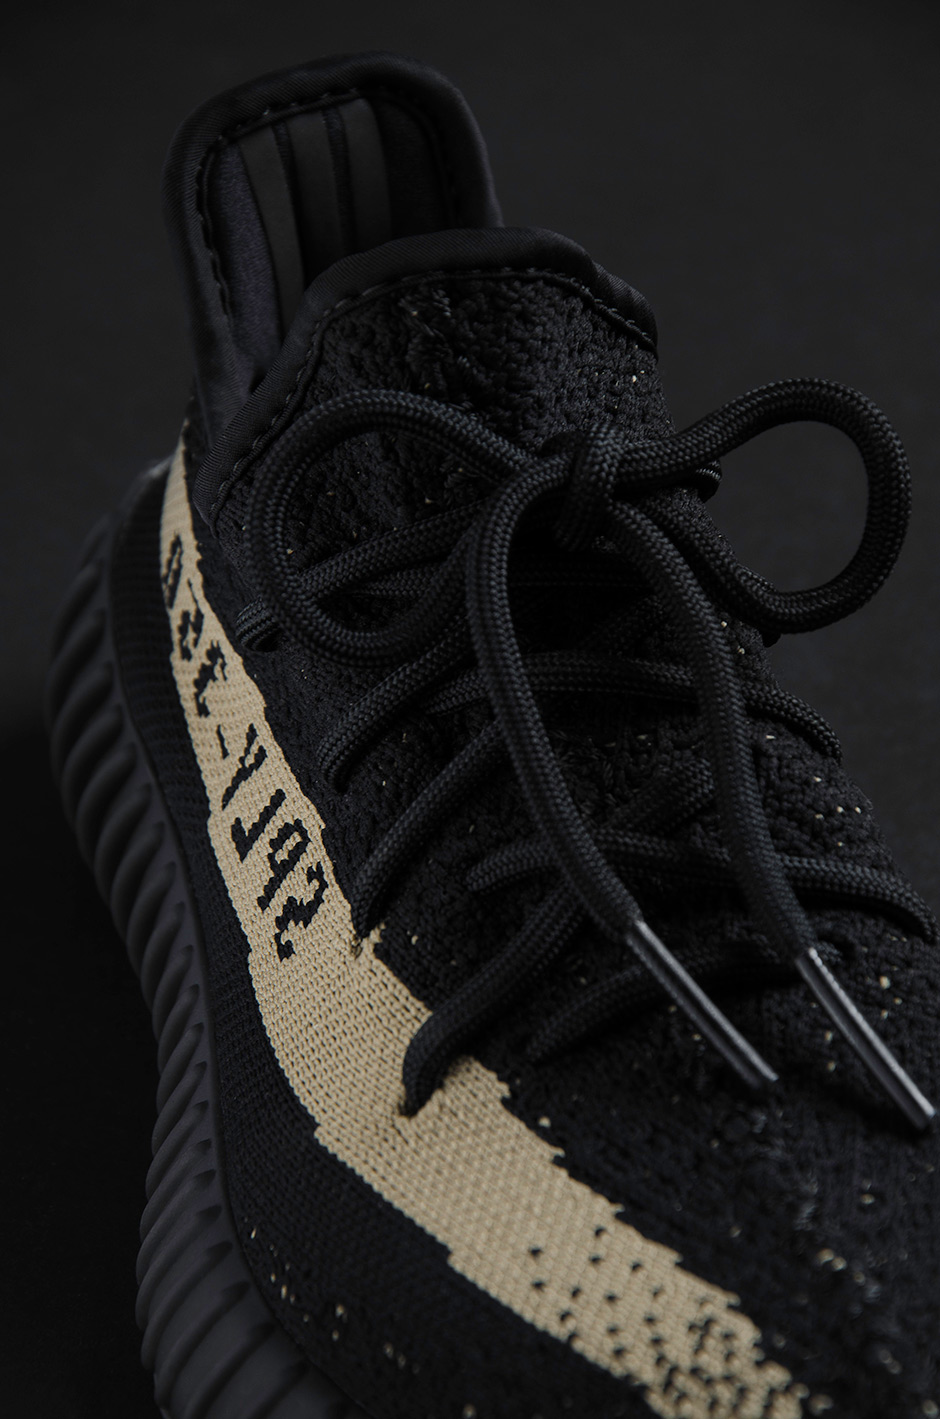 Adidas Yeezy Boost 350 V2 Black Olive By9611 7